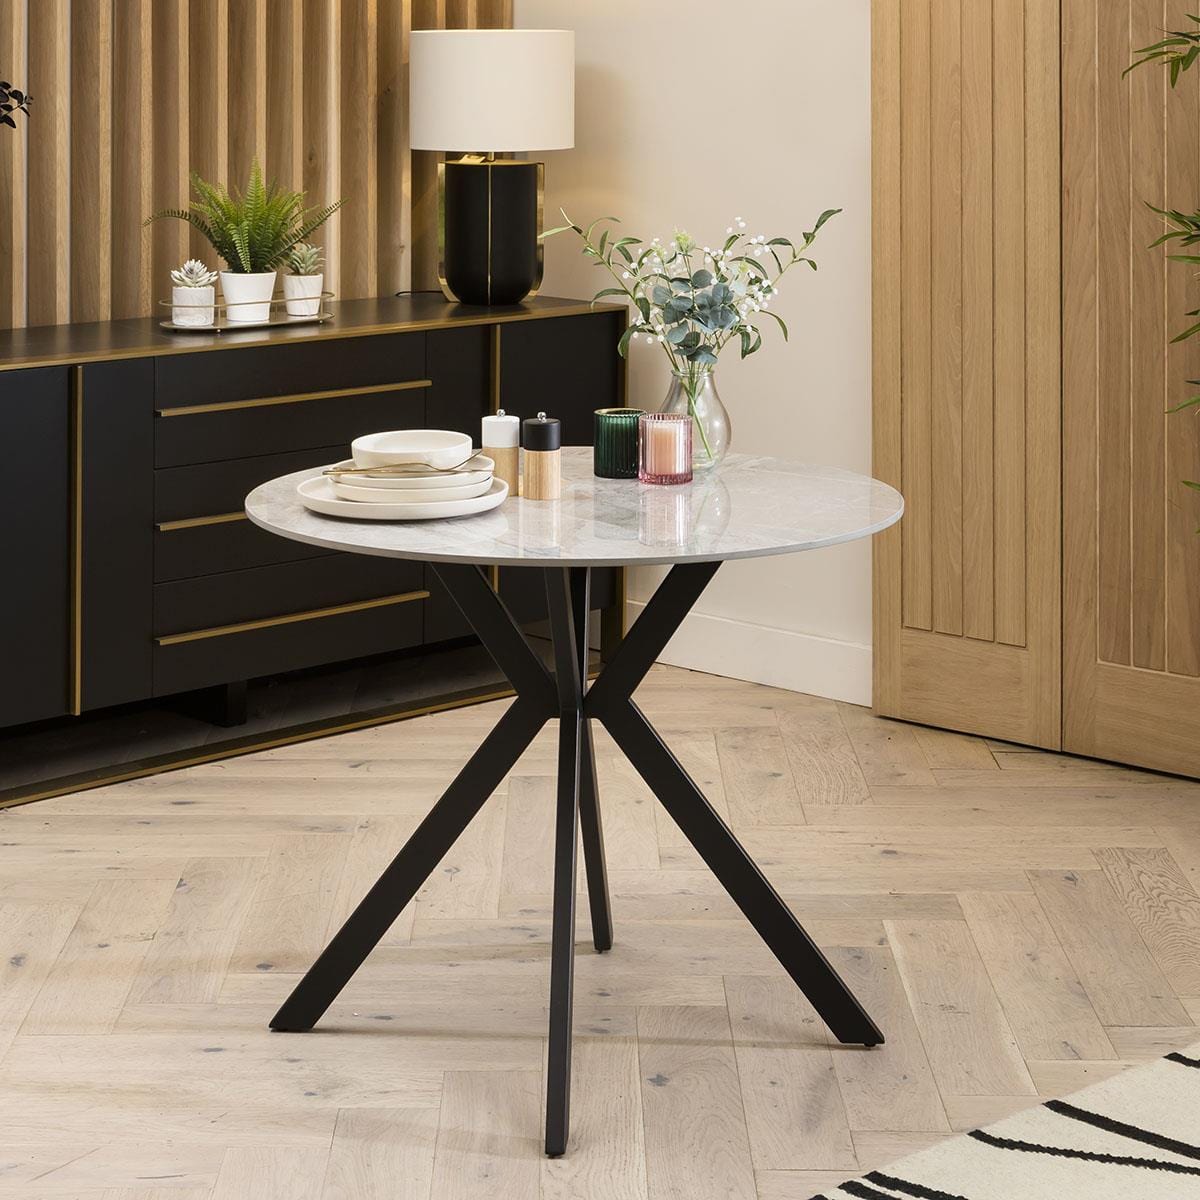 Quatropi Small Round Modern Ceramic Marble Dining Table - 4 Seater Grey High Gloss 90cm